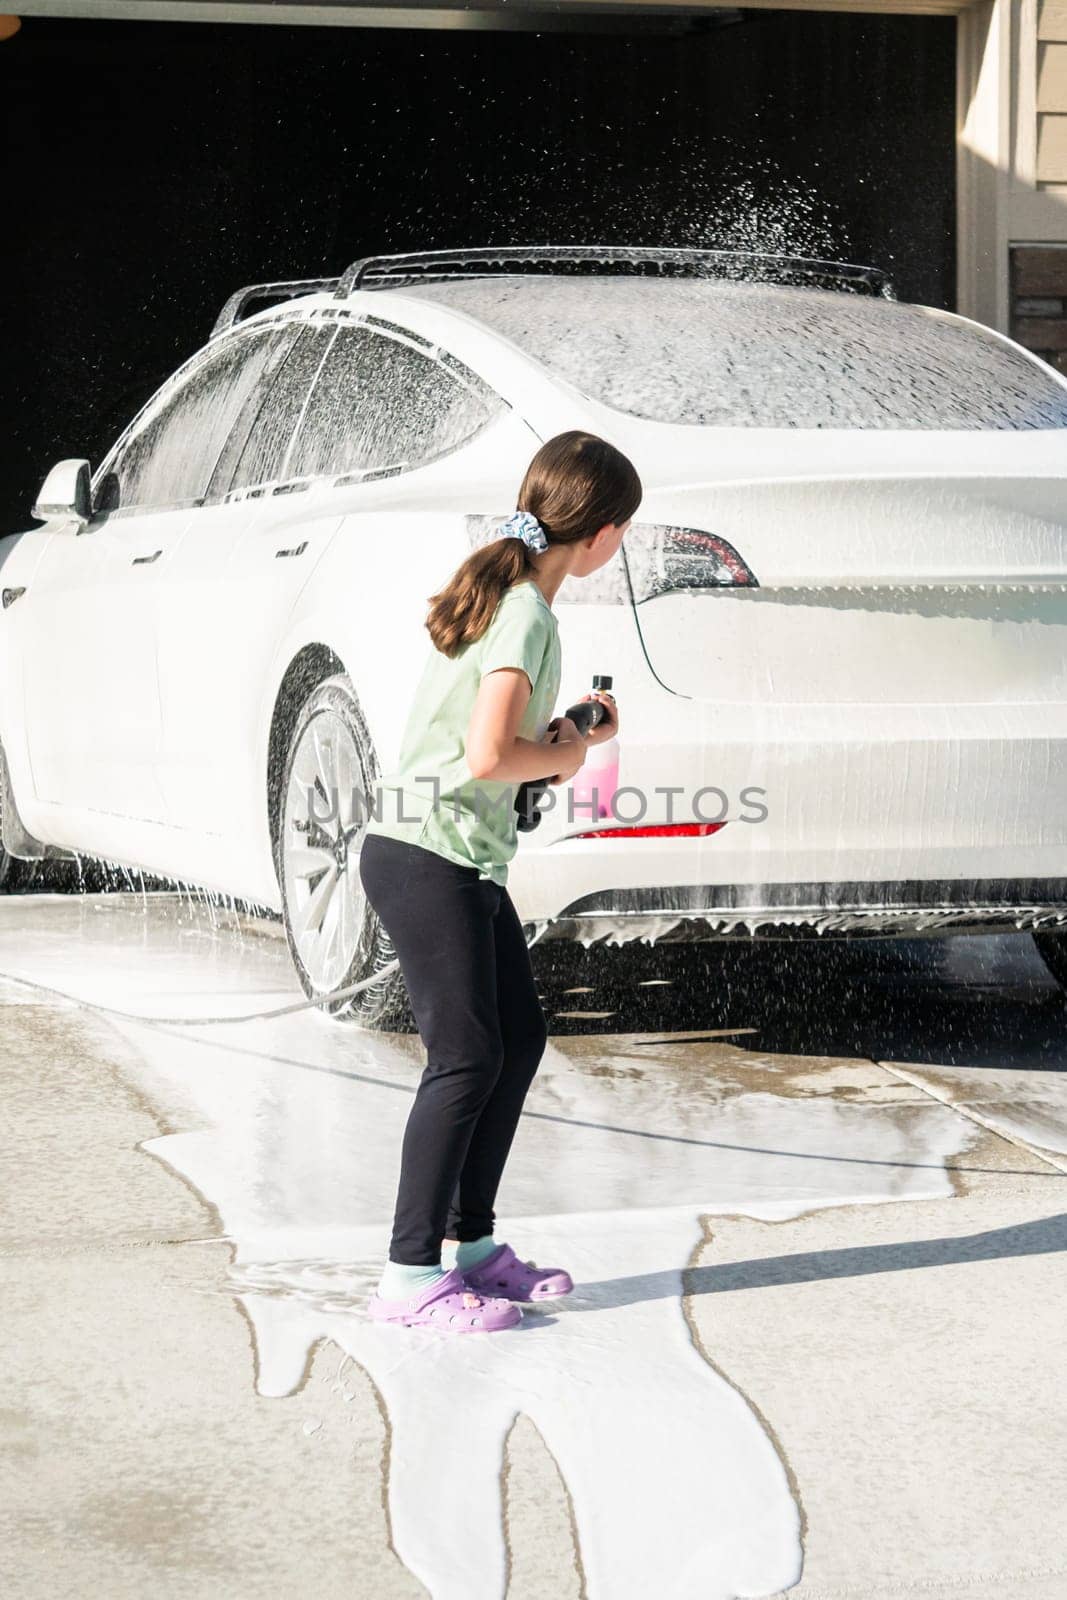 Little Helper Washing the Family Electric Car by arinahabich